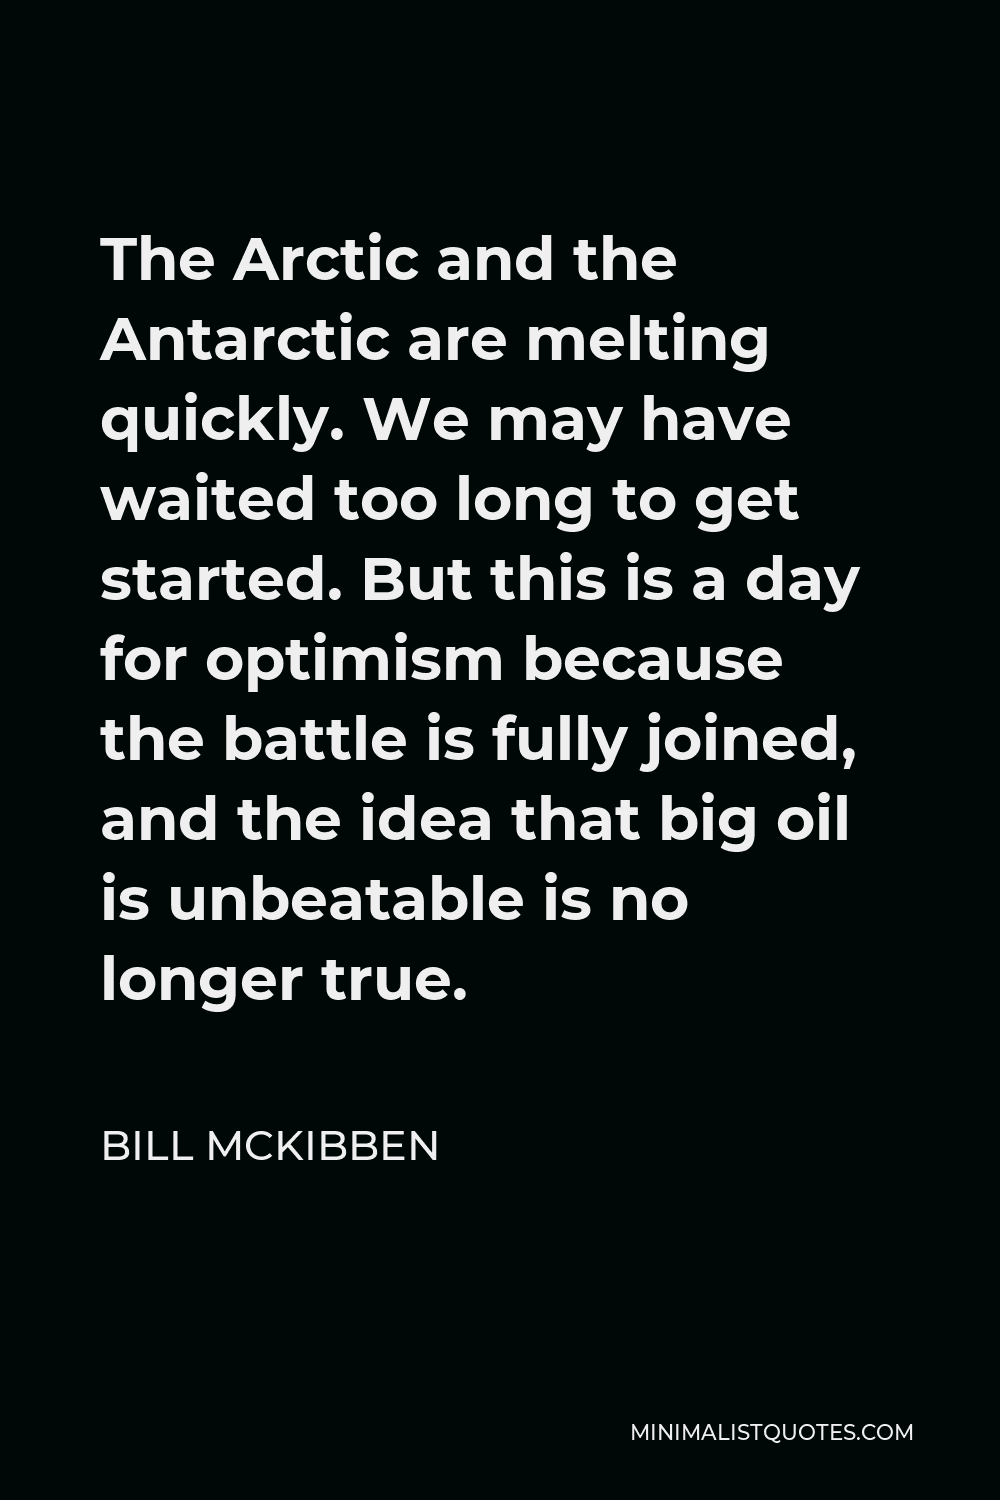 Bill McKibben Quote - The Arctic and the Antarctic are melting quickly. We may have waited too long to get started. But this is a day for optimism because the battle is fully joined, and the idea that big oil is unbeatable is no longer true.